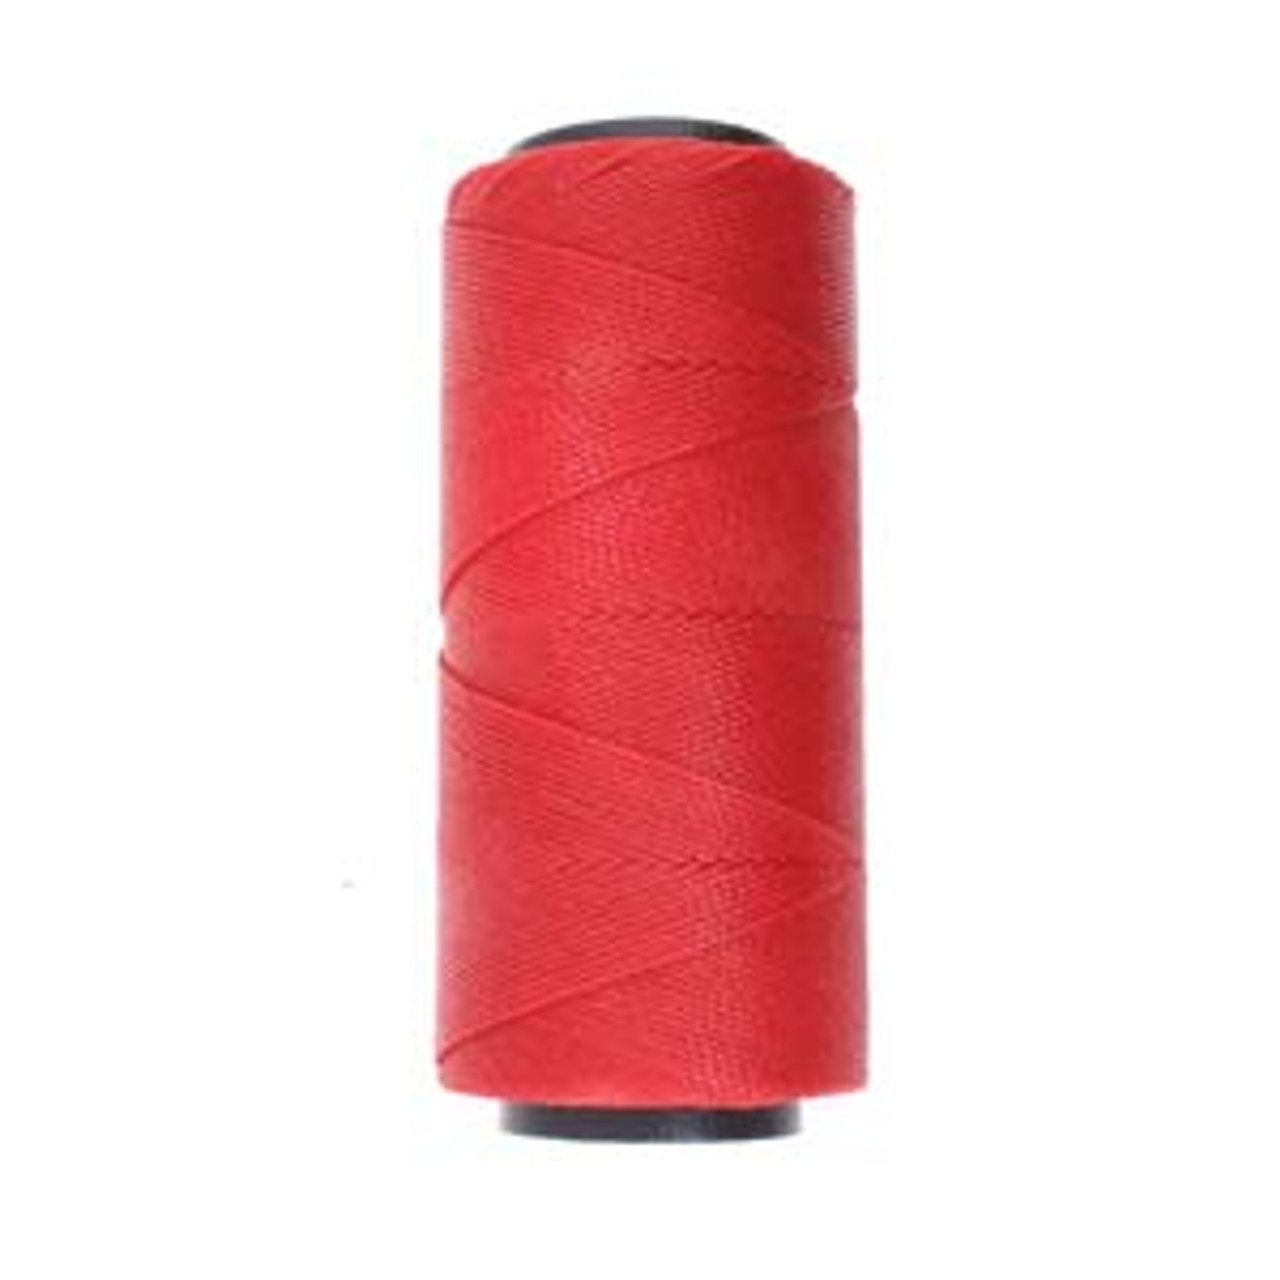 6yds 2 ply Red Waxed Brazilian Cord